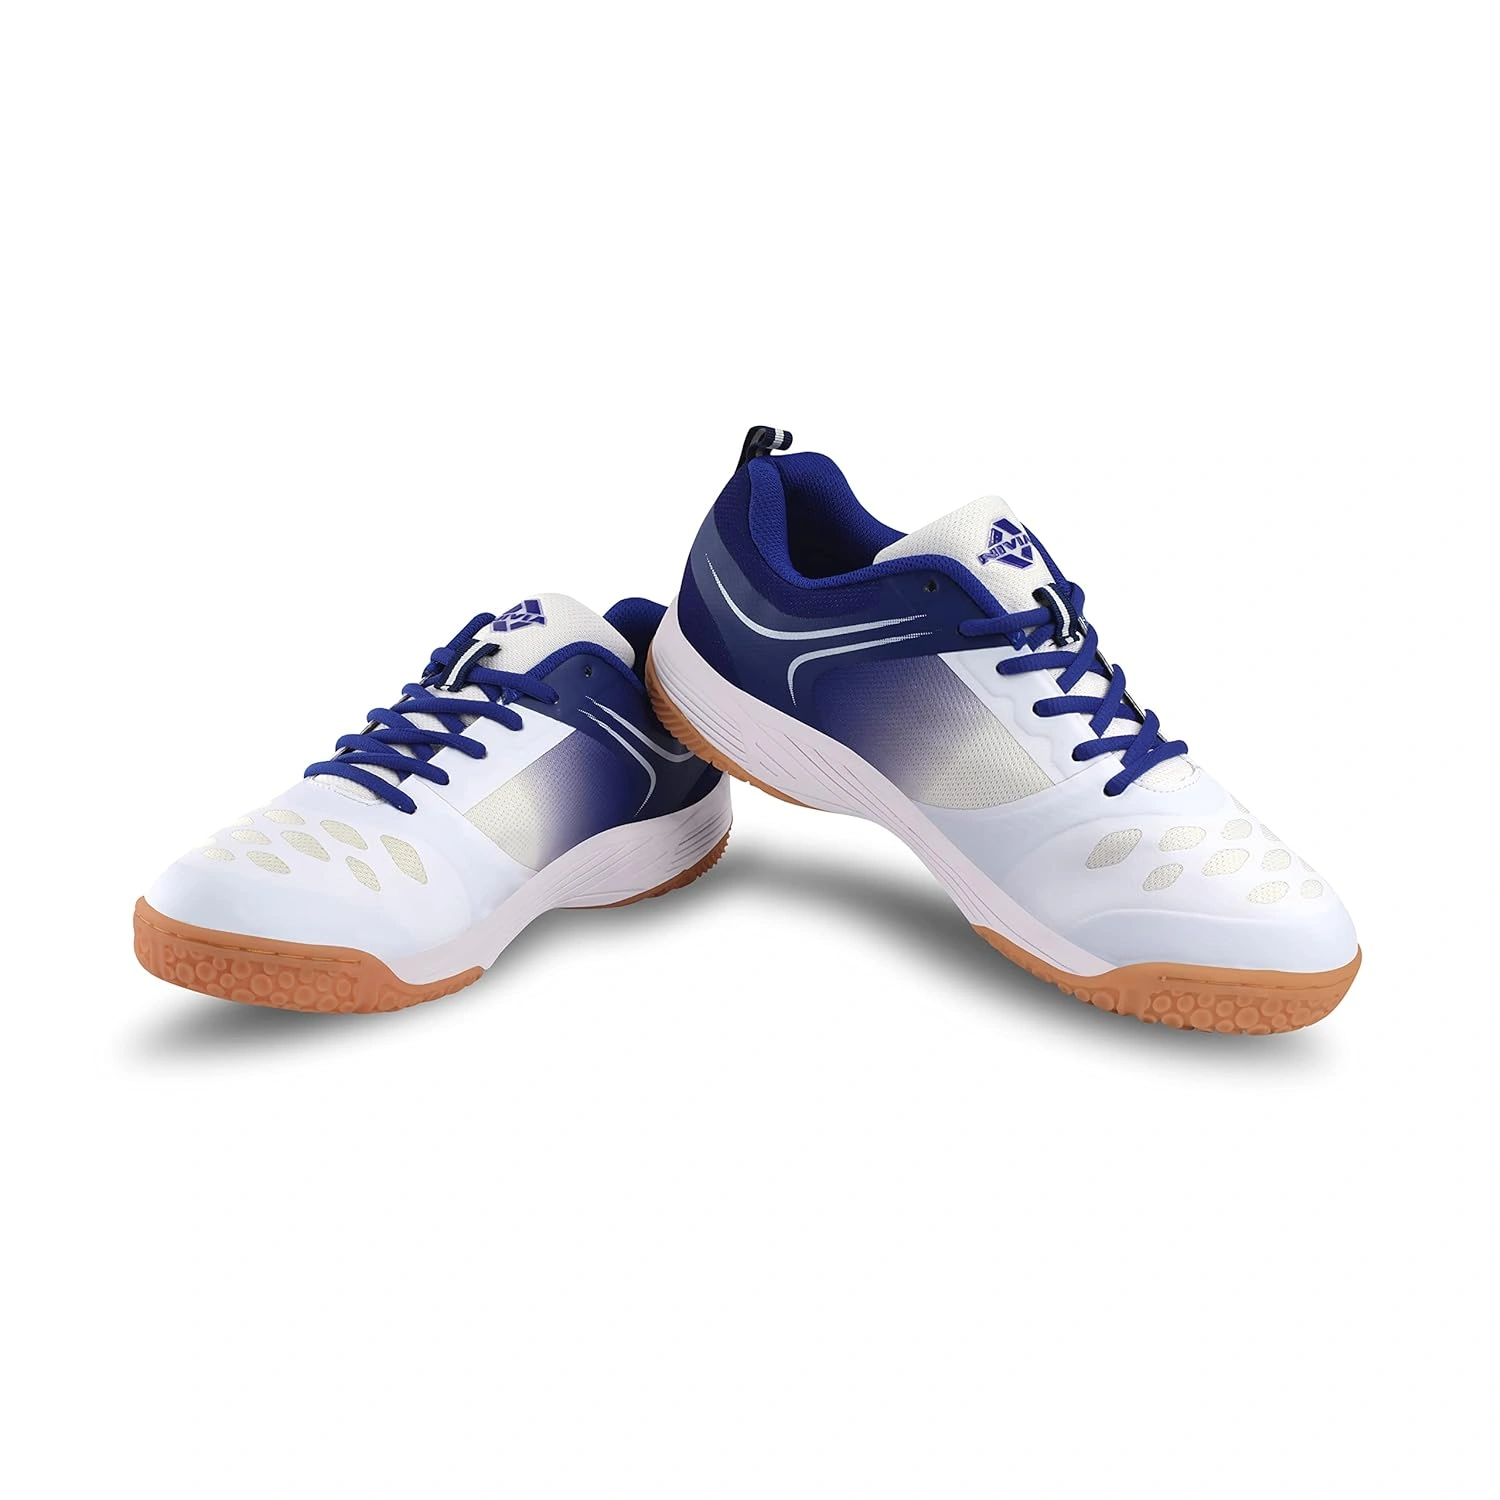 Nivia Hy-court 2.0 Badminton Shoes For Mens-WHITE-6-5